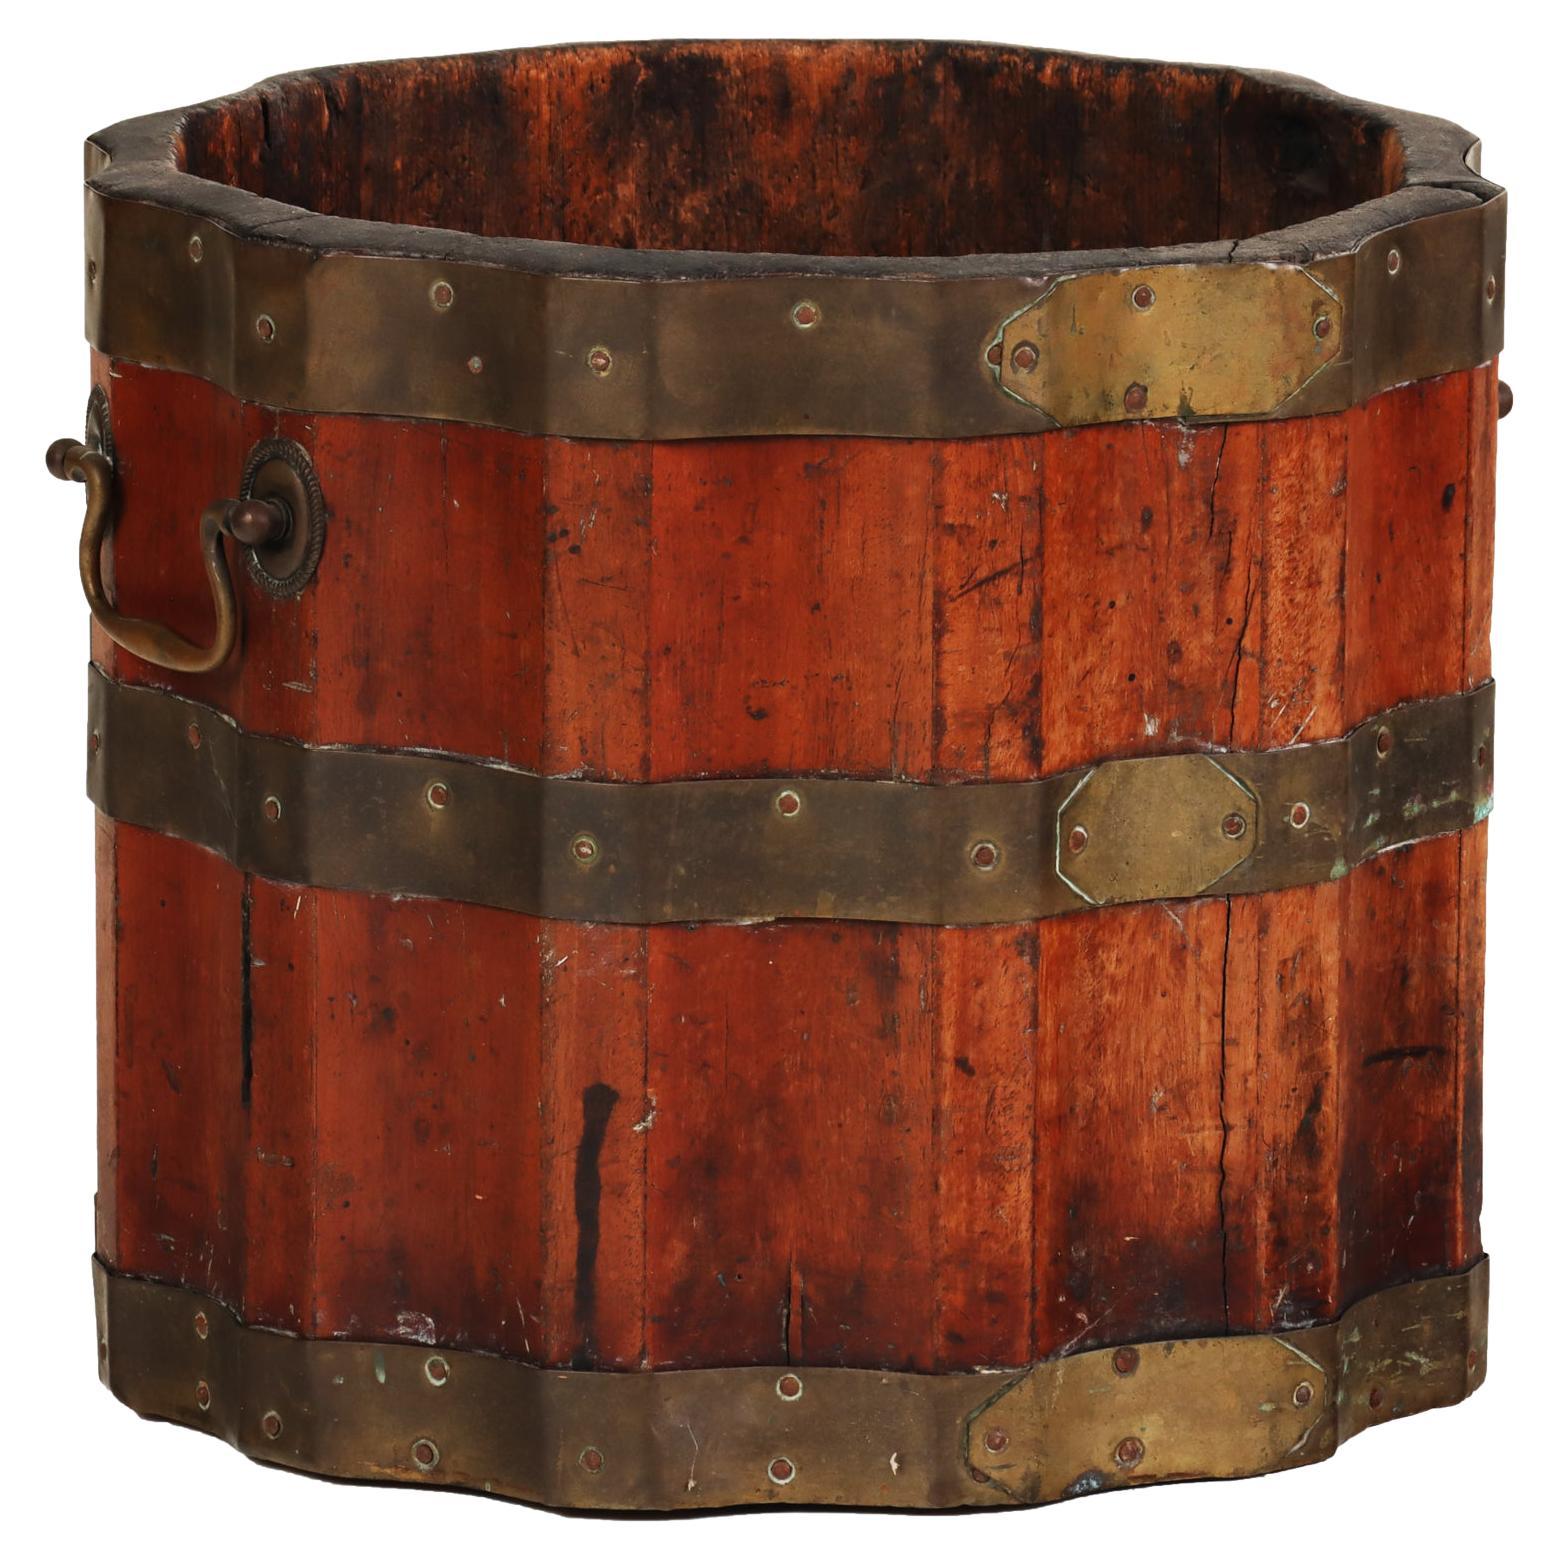 Fluted Vintage Wine Barrel or Bucket, with Brass Bands and Handles, C 19th C